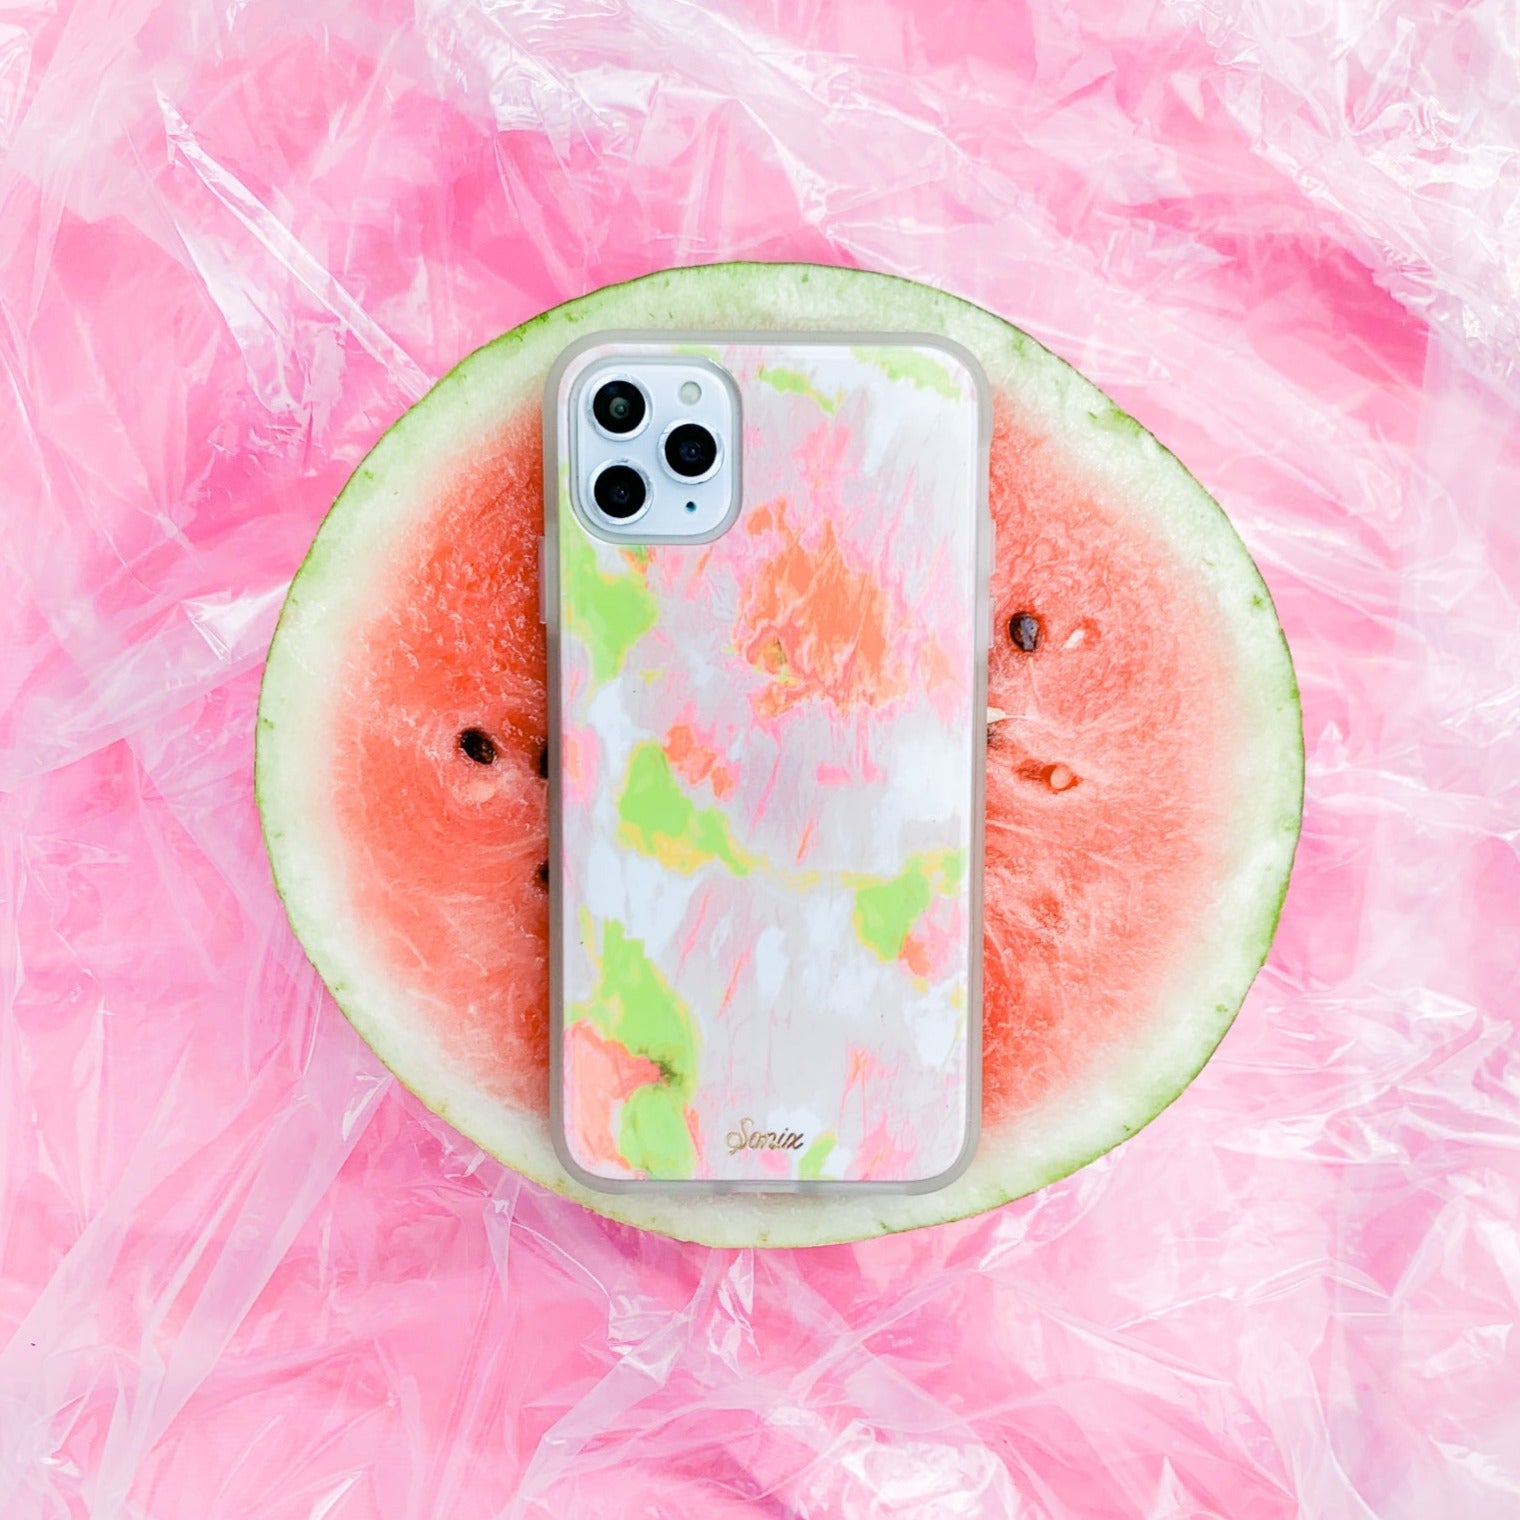 Watermelon Glow iPhone Case - Glow in the dark bumper with pink and green paint splots across the case - on a watermelon and pink background